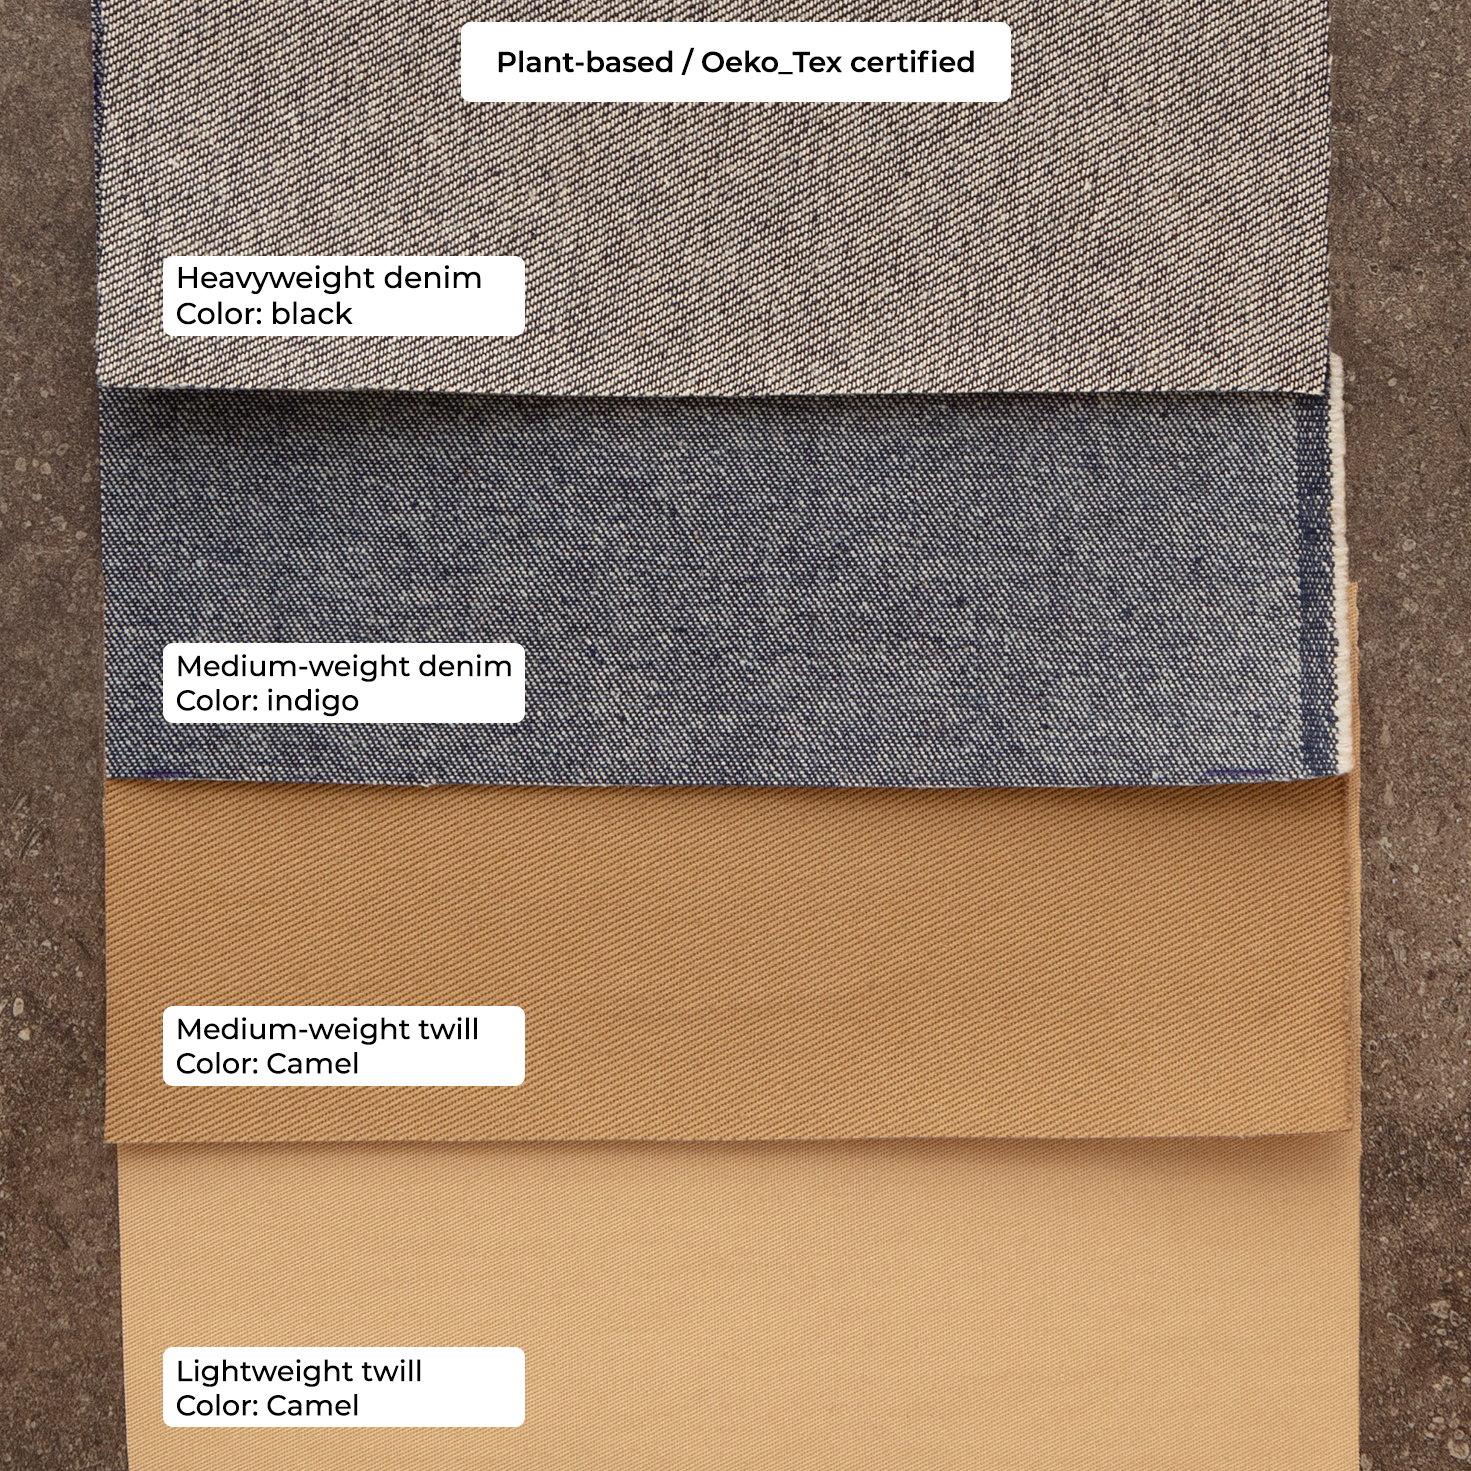 Certified oeko tex cotton backings for biodegradable cork fabric